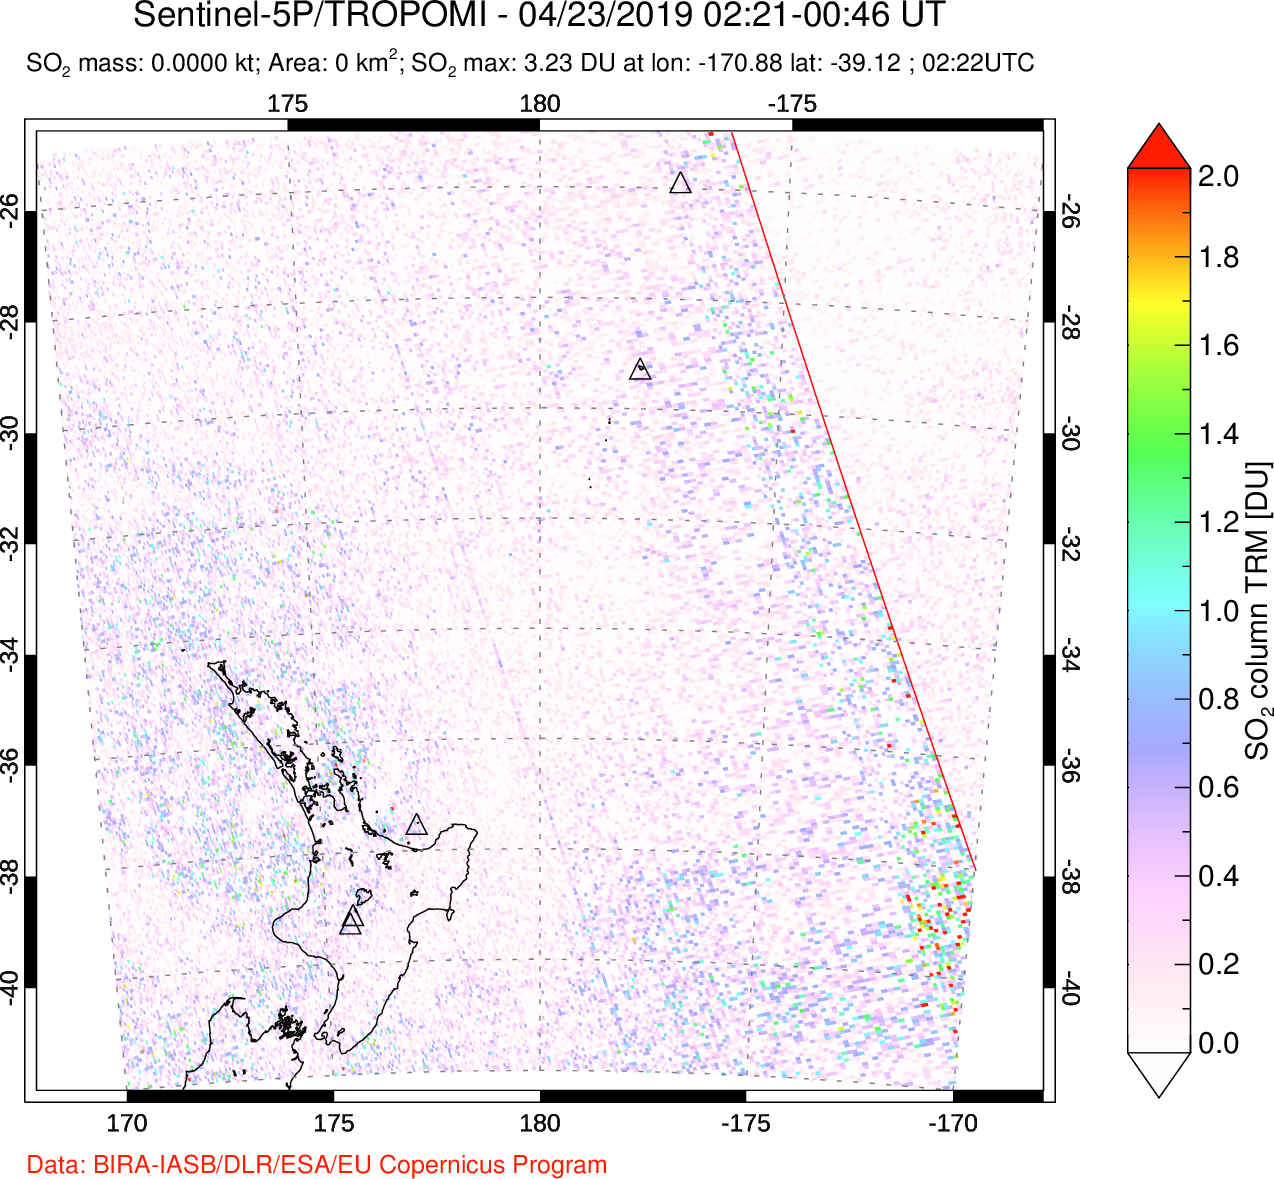 A sulfur dioxide image over New Zealand on Apr 23, 2019.